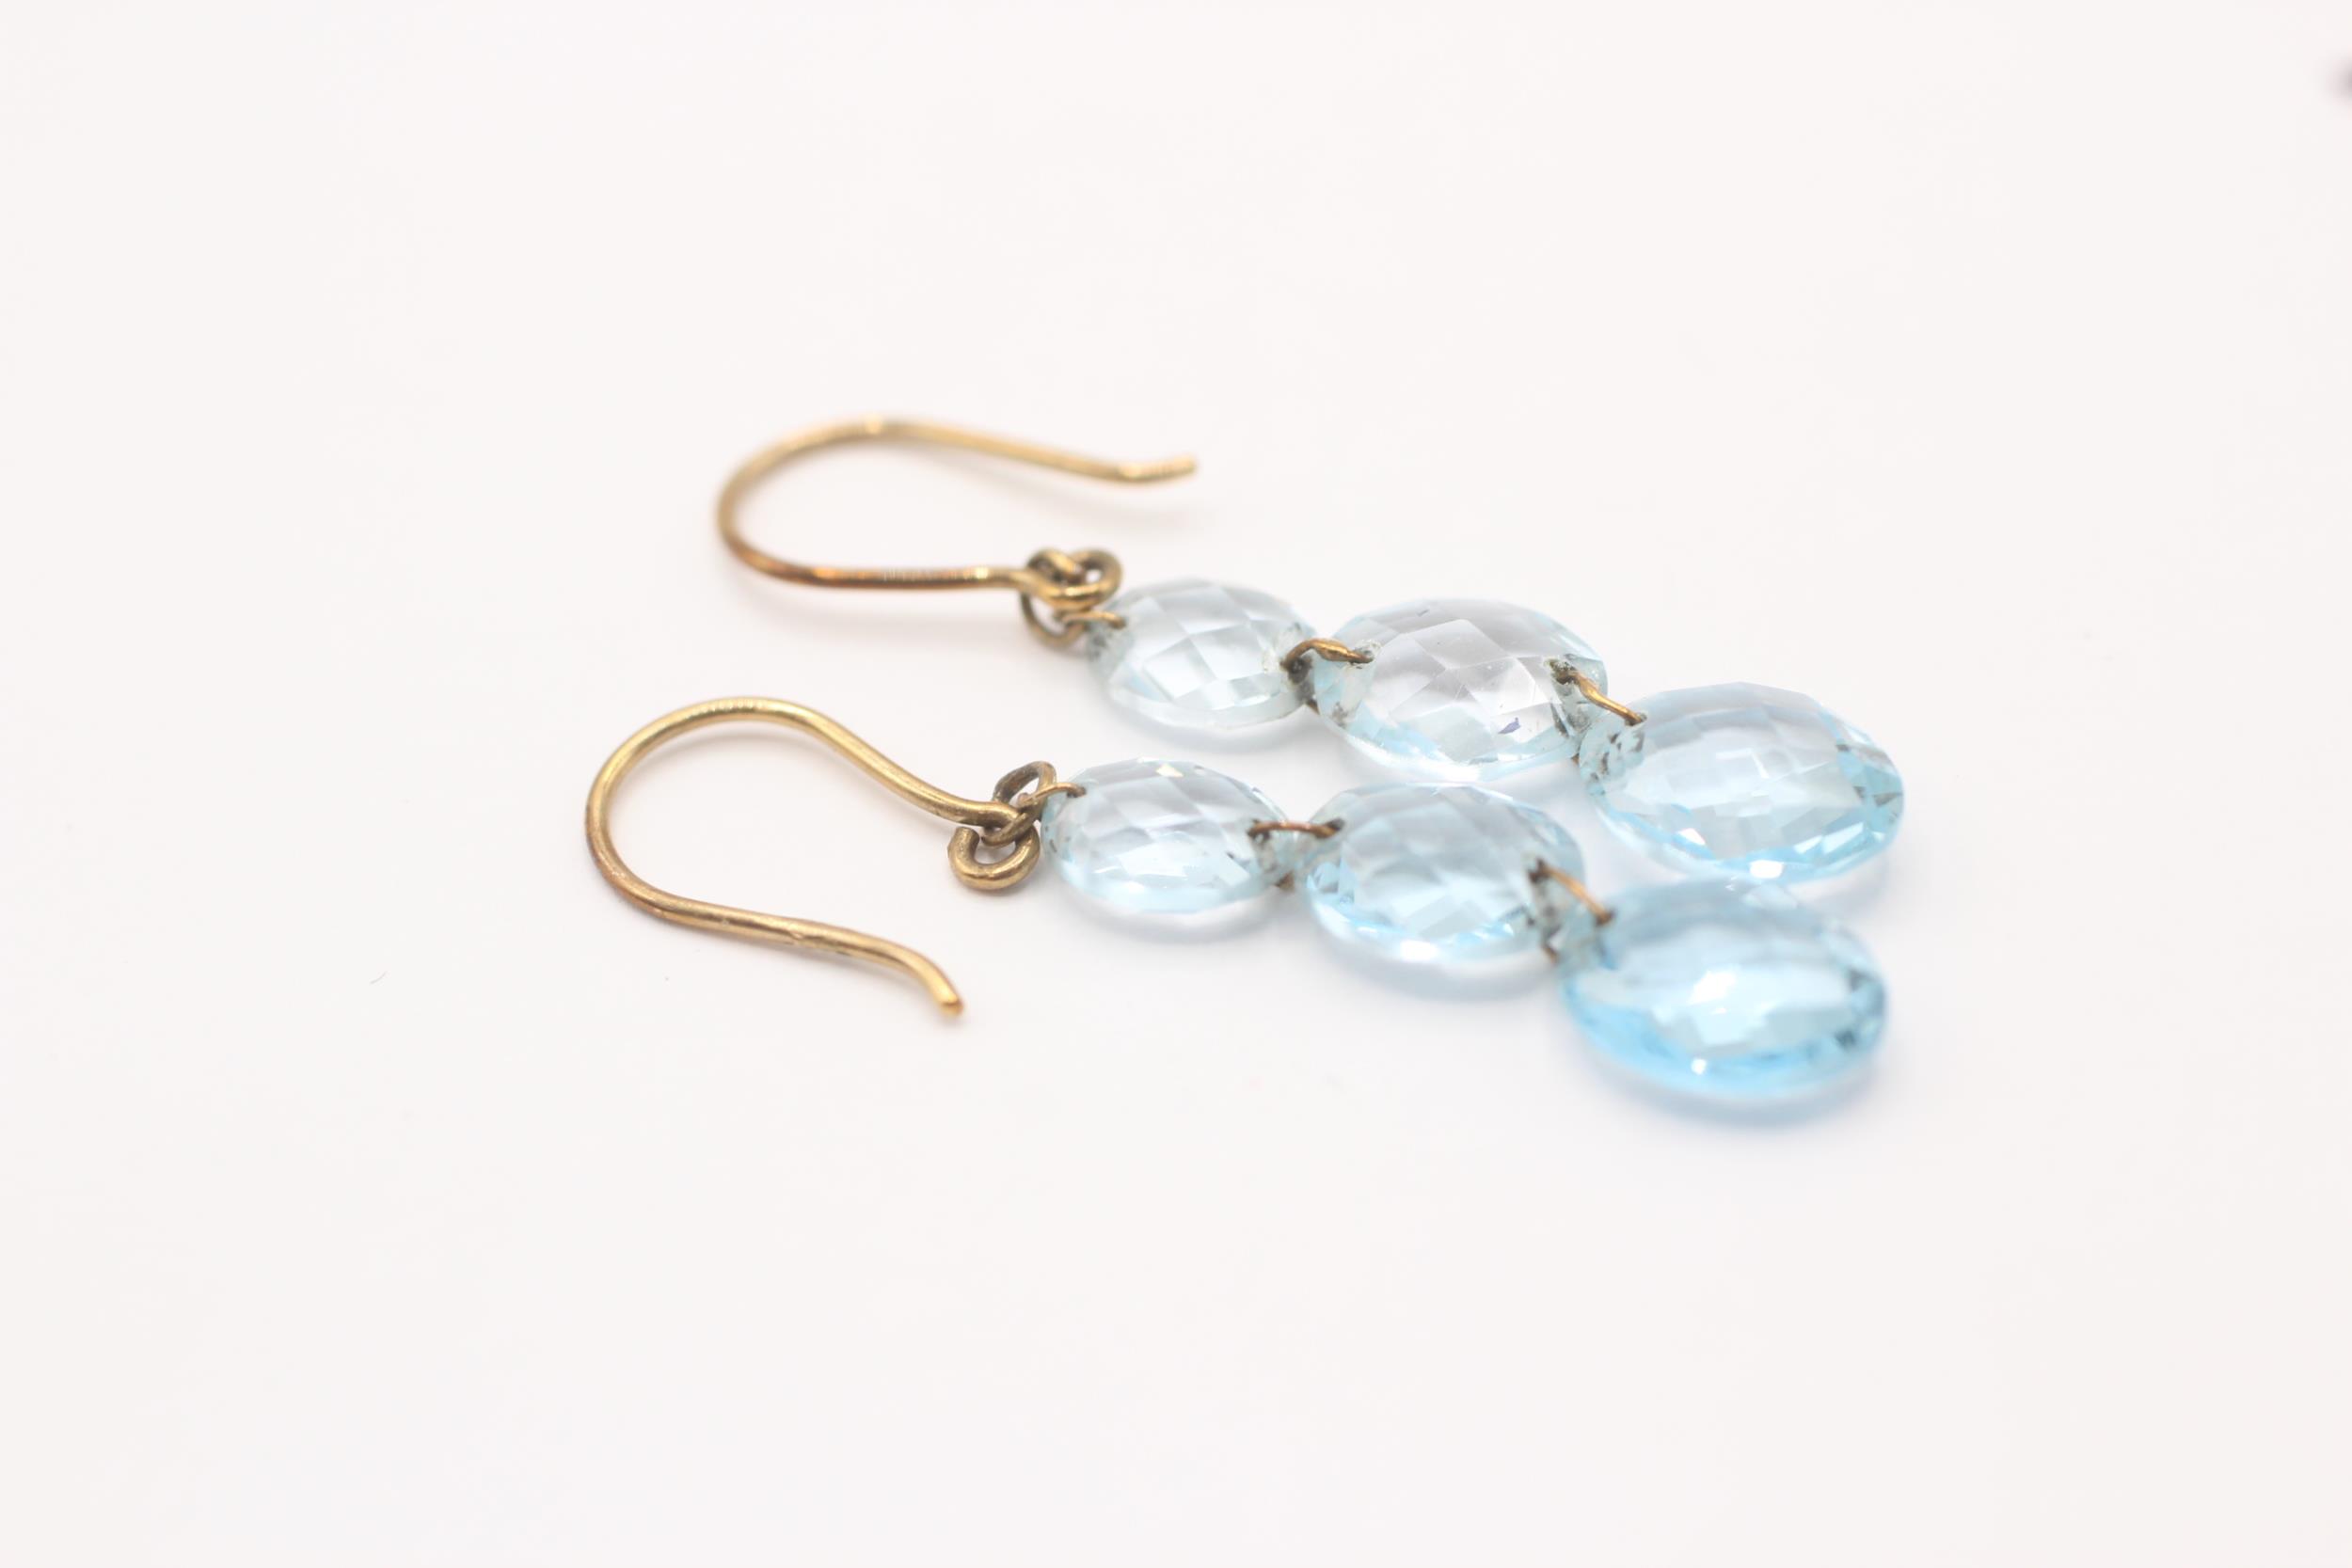 9ct gold faceted blue topaz drop earrings with French hooks 2.1 g - Image 3 of 5